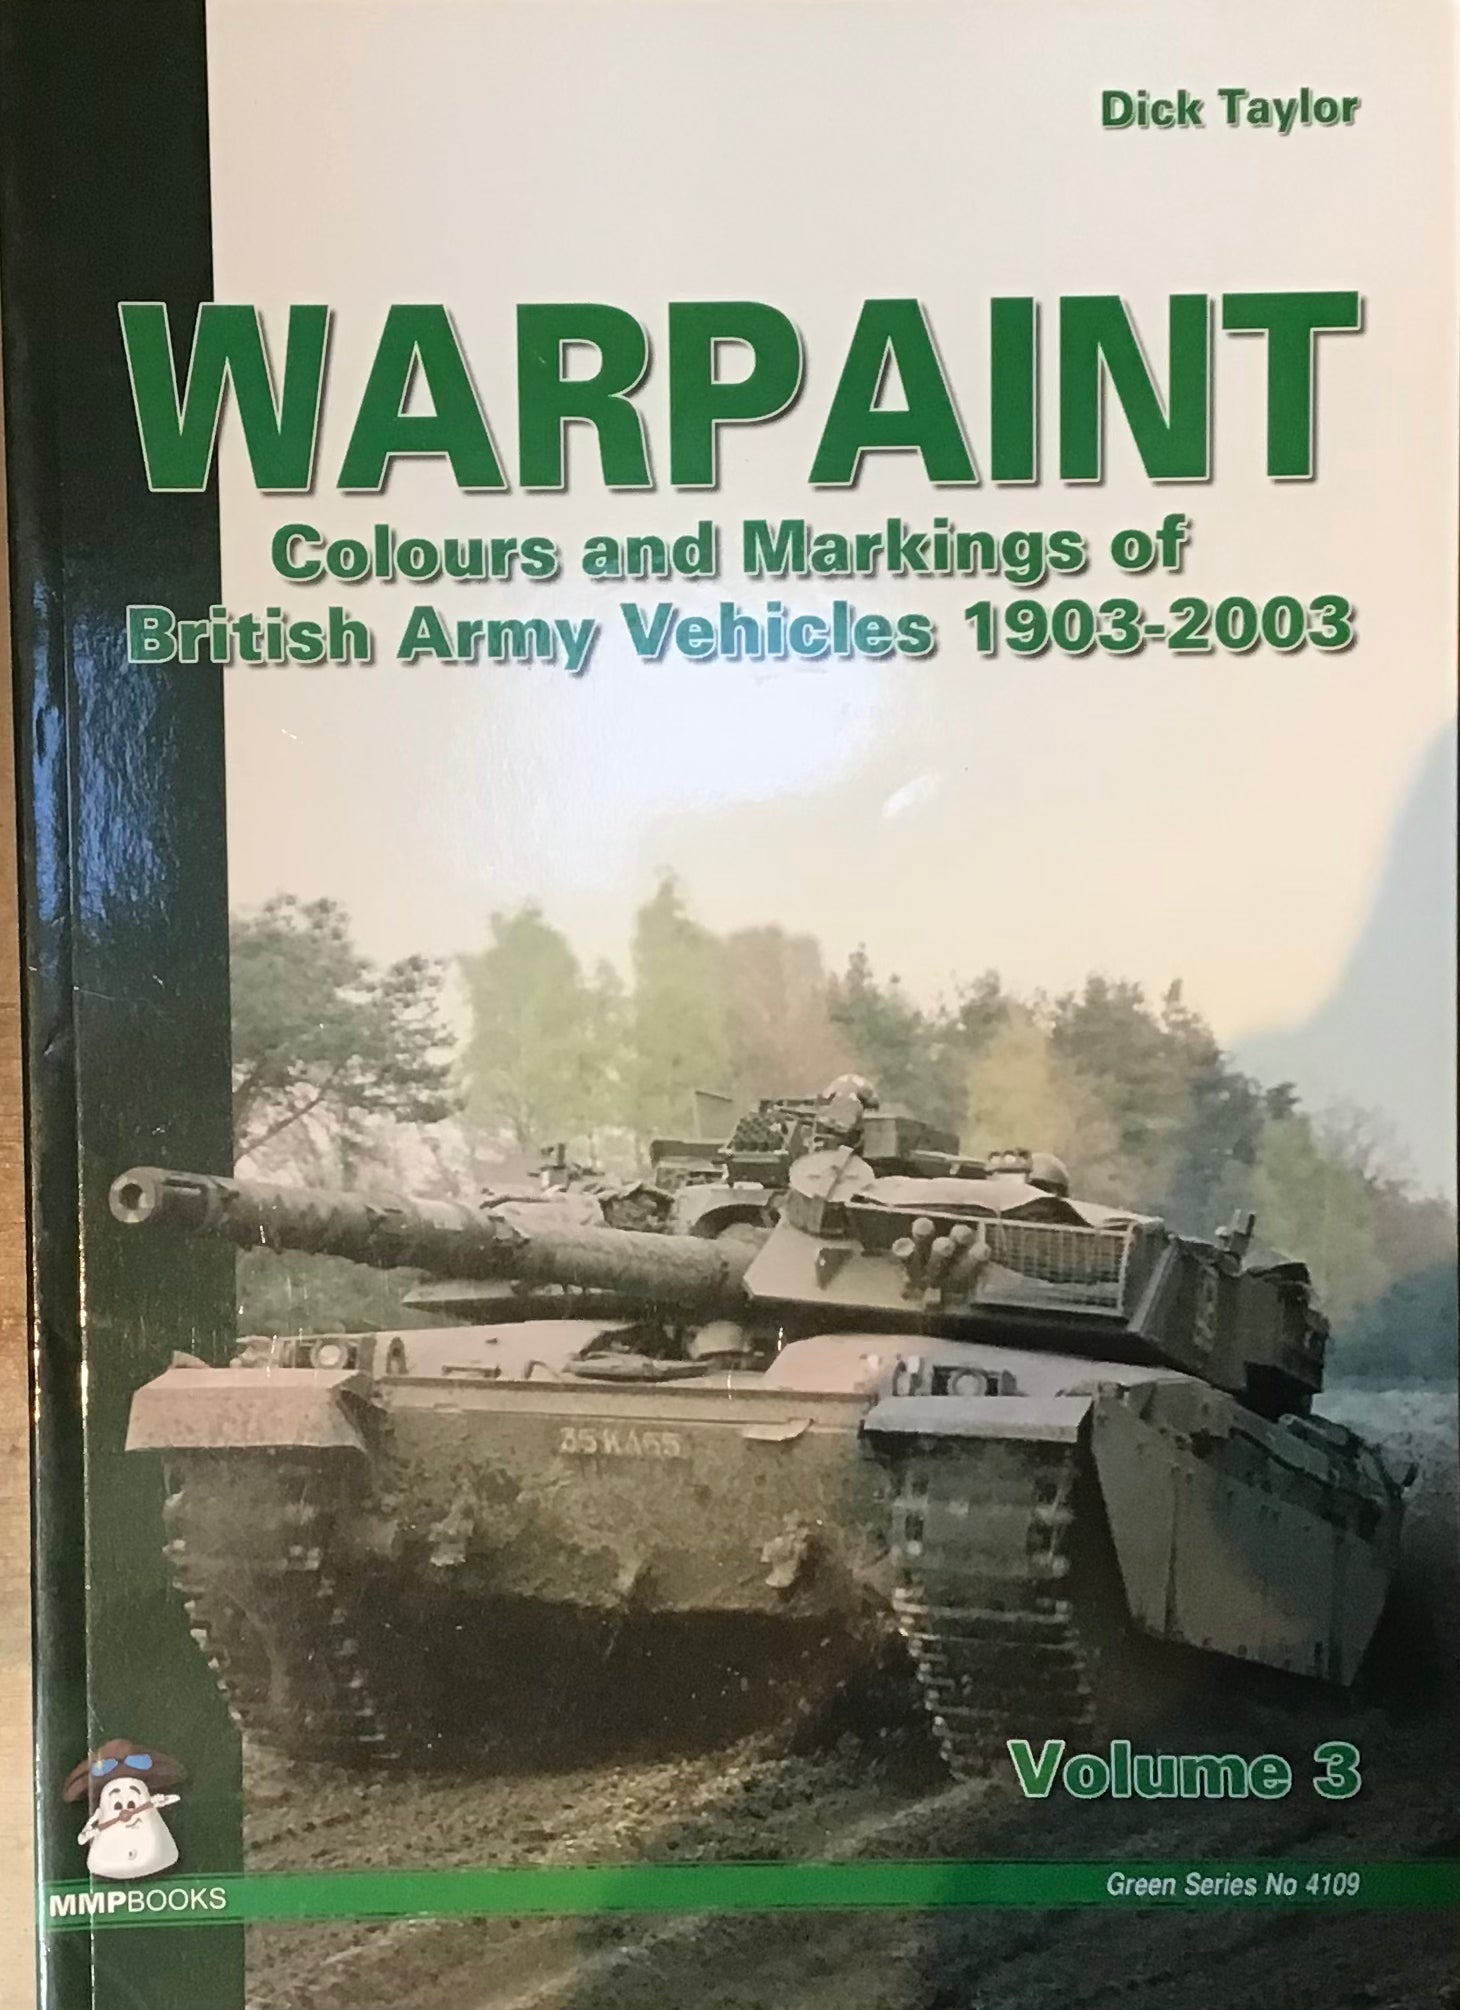 Warpaint Volume 3: Colours and Markings of British Army Vehicles 1903-2003 by Dick Taylor - Chester Model Centre